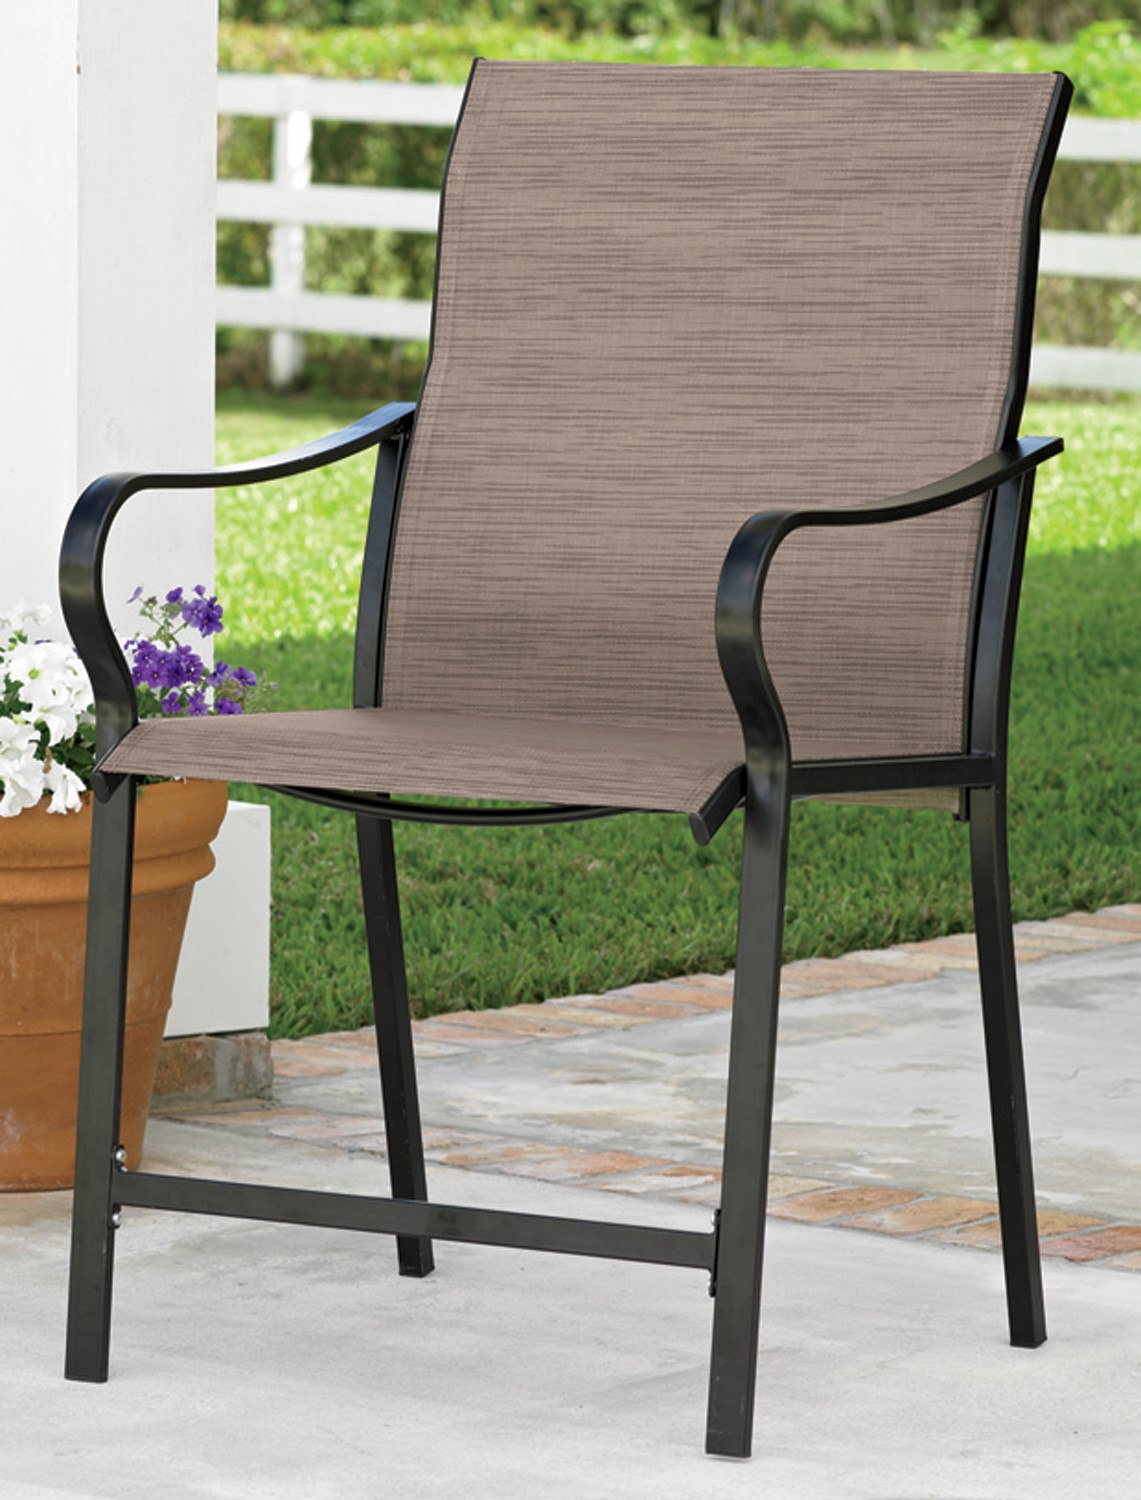 Magic Heavy Duty Outdoor Furniture Big And Tall Lawn Best Home Chair within proportions 1141 X 1500